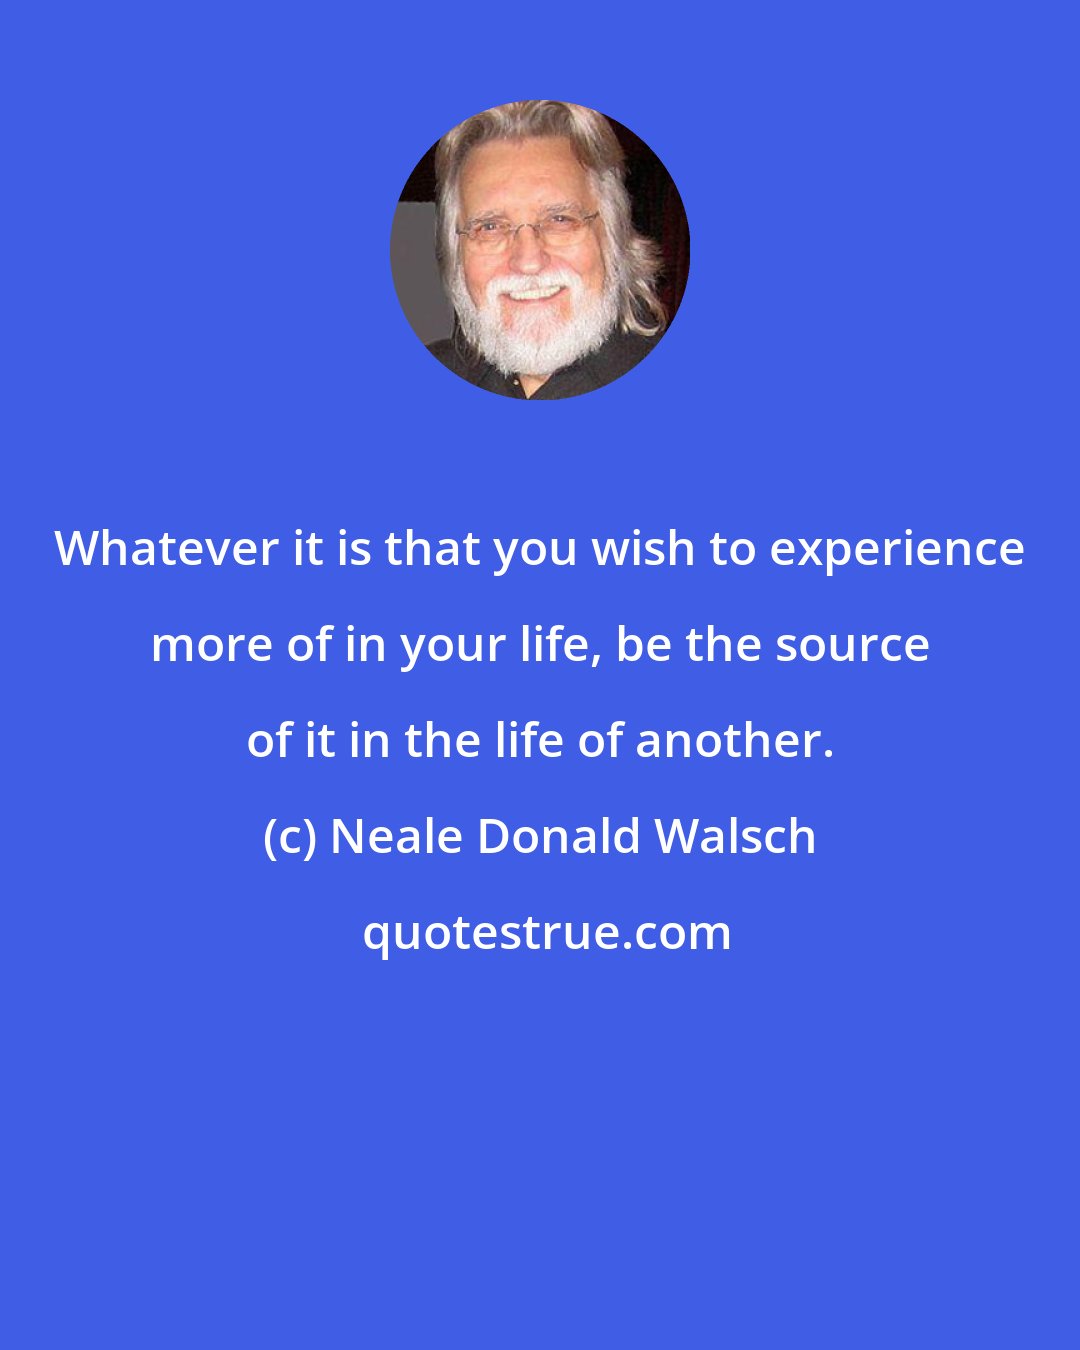 Neale Donald Walsch: Whatever it is that you wish to experience more of in your life, be the source of it in the life of another.